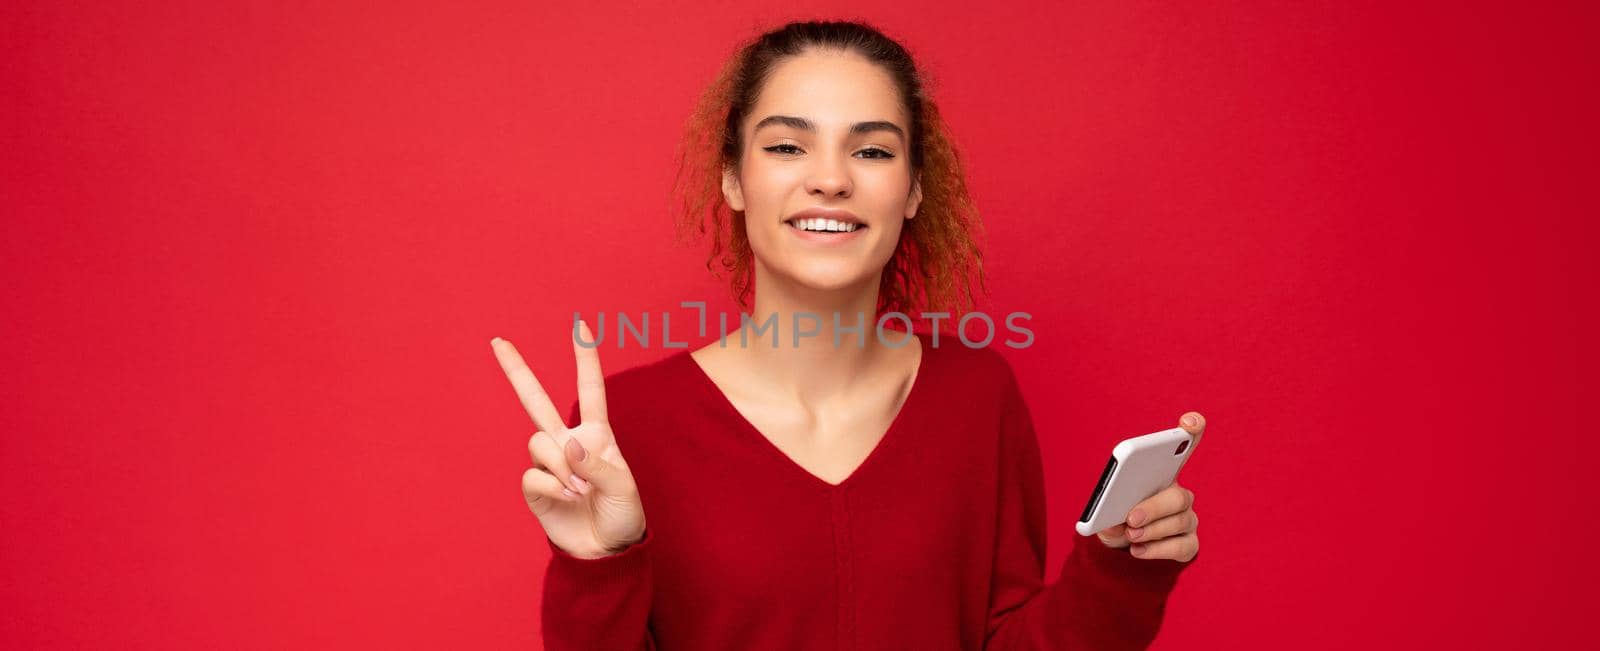 Photo of happy smiling woman with gathered curly hair wearing dark red sweater isolated over red background holding smartphone having fun and showing peace gesture looking at camera by TRMK